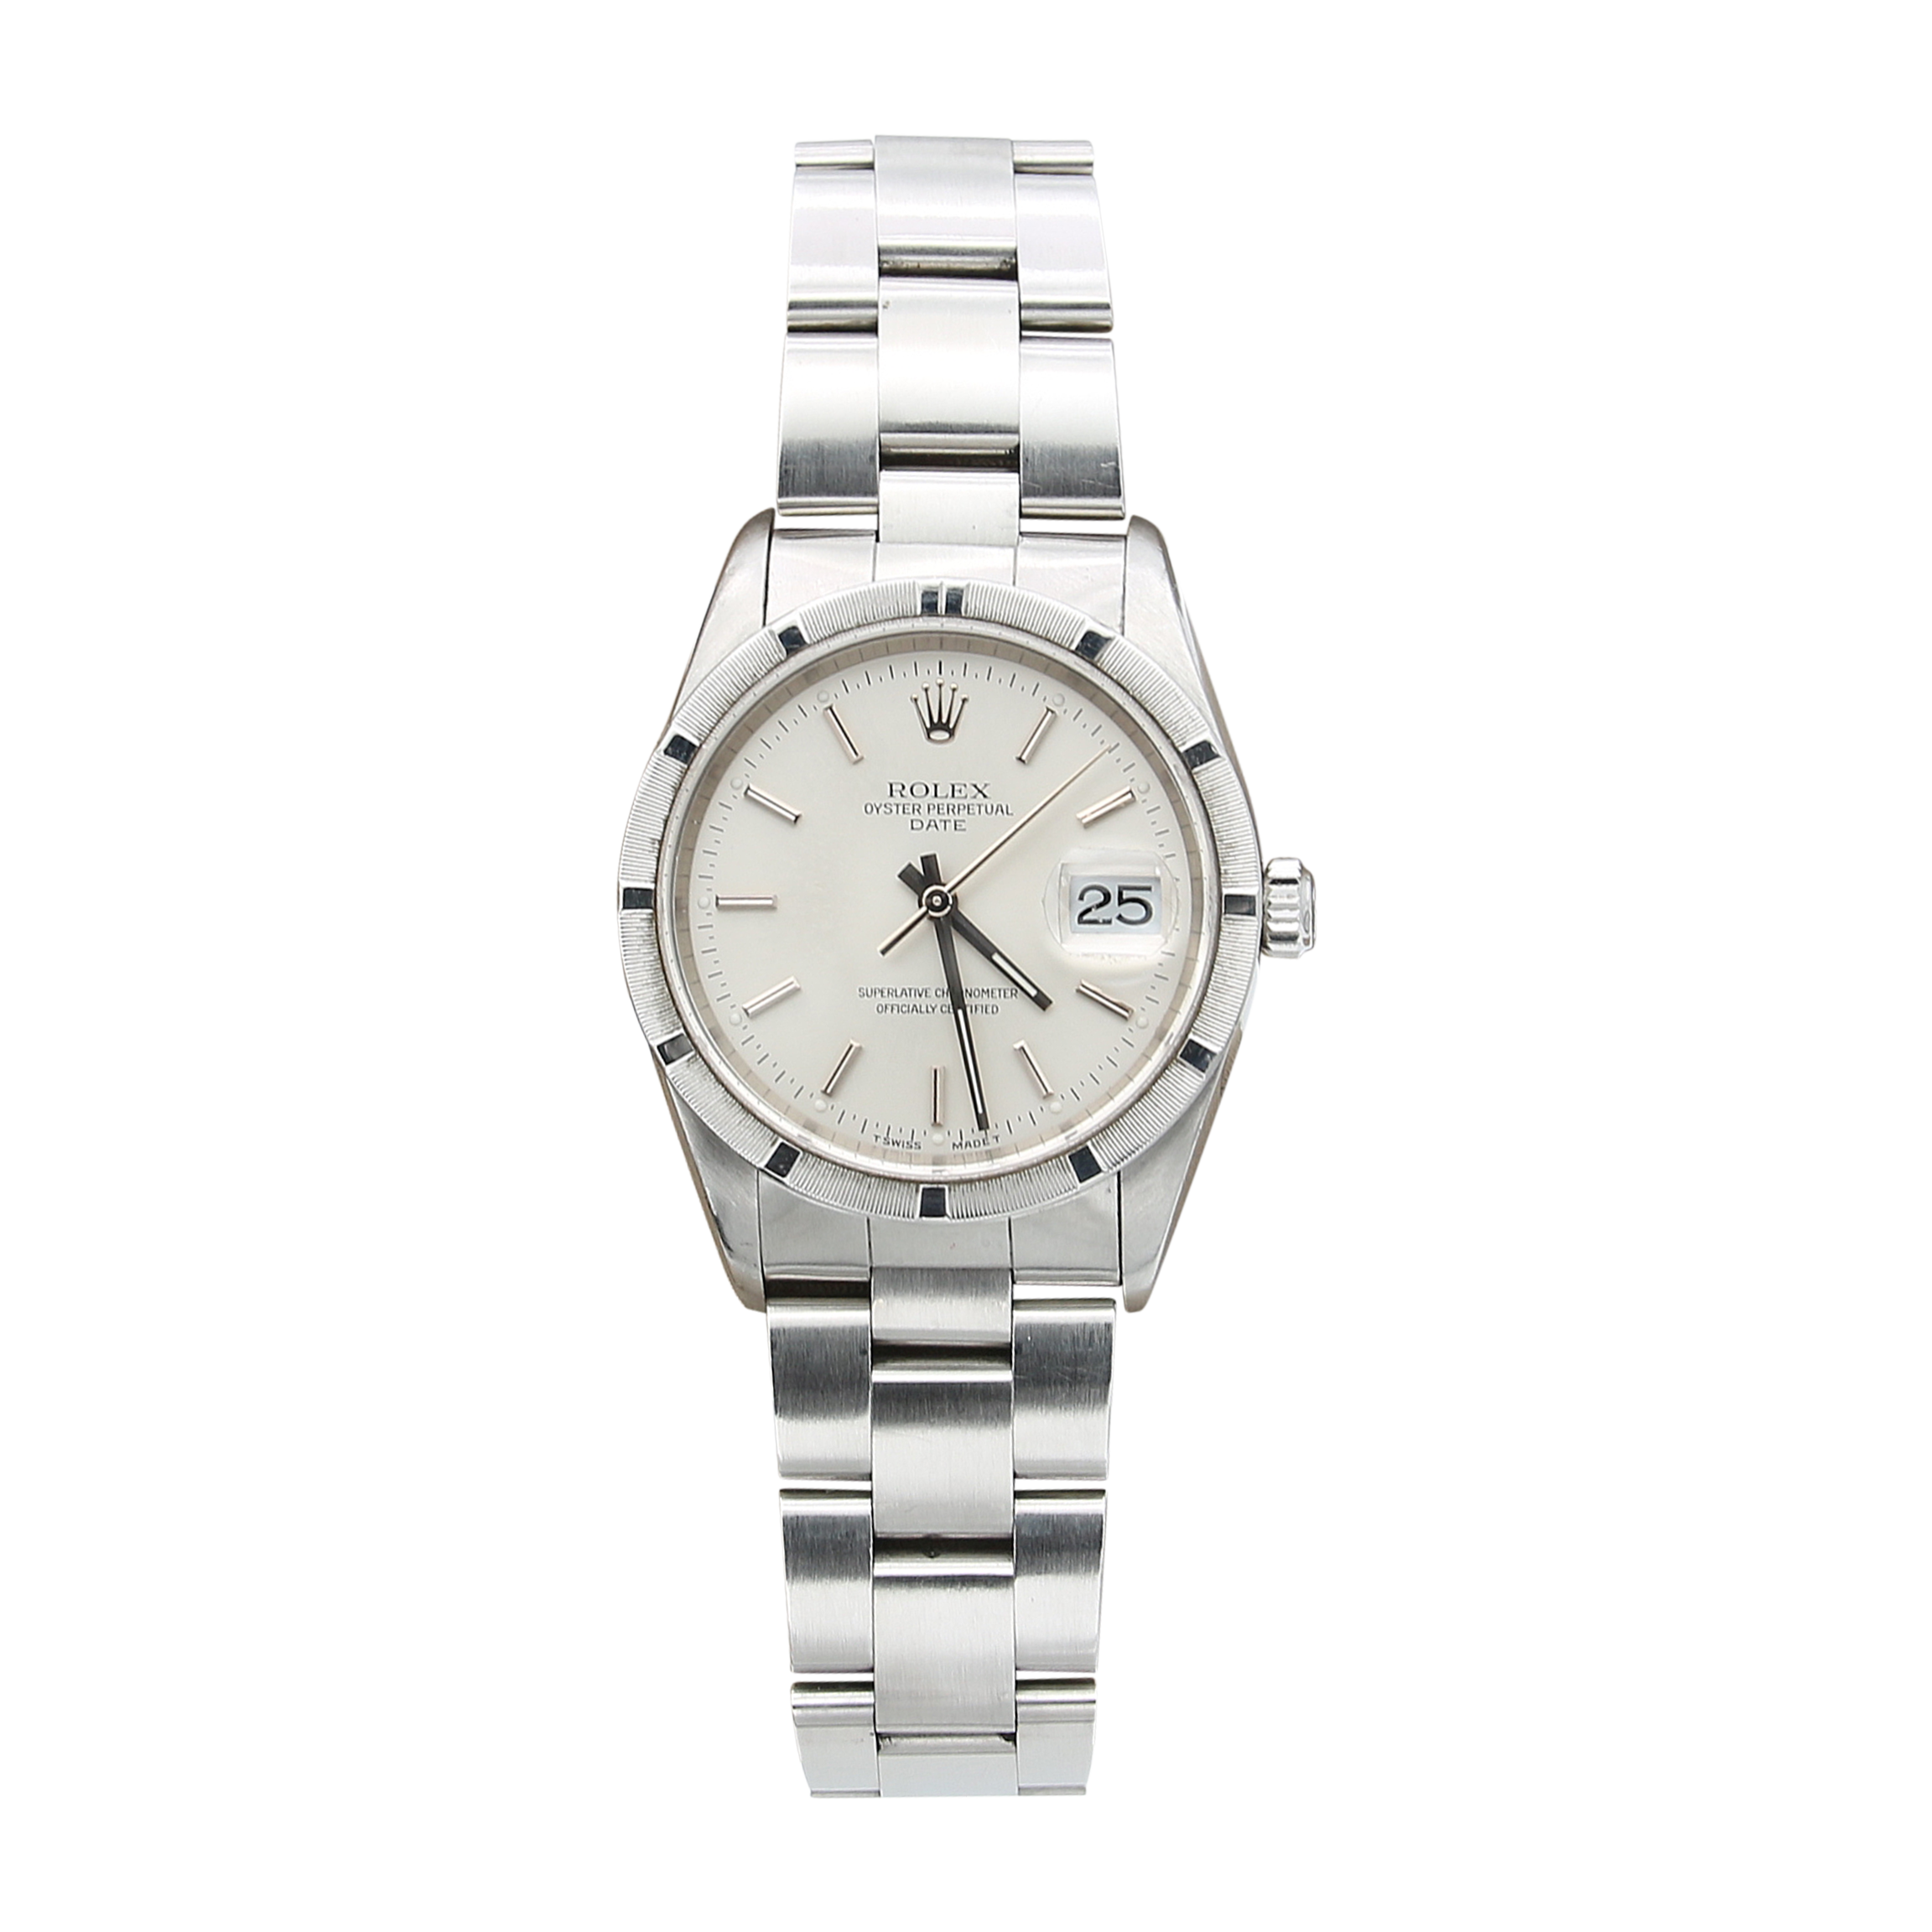 Rolex Date ref. 15210 - Silver Dial - With Papers